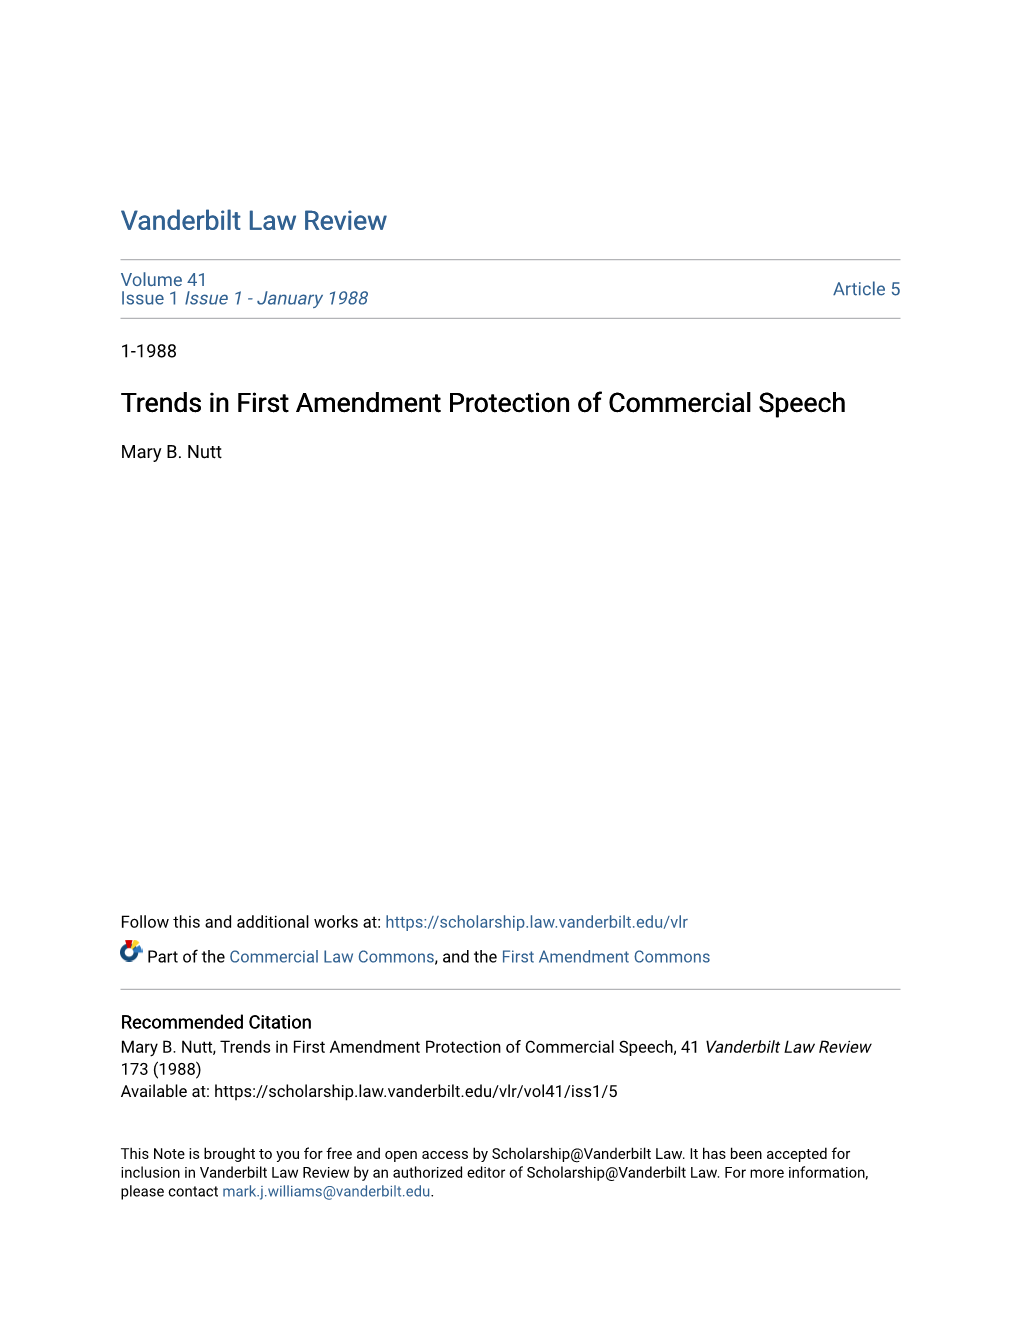 Trends in First Amendment Protection of Commercial Speech